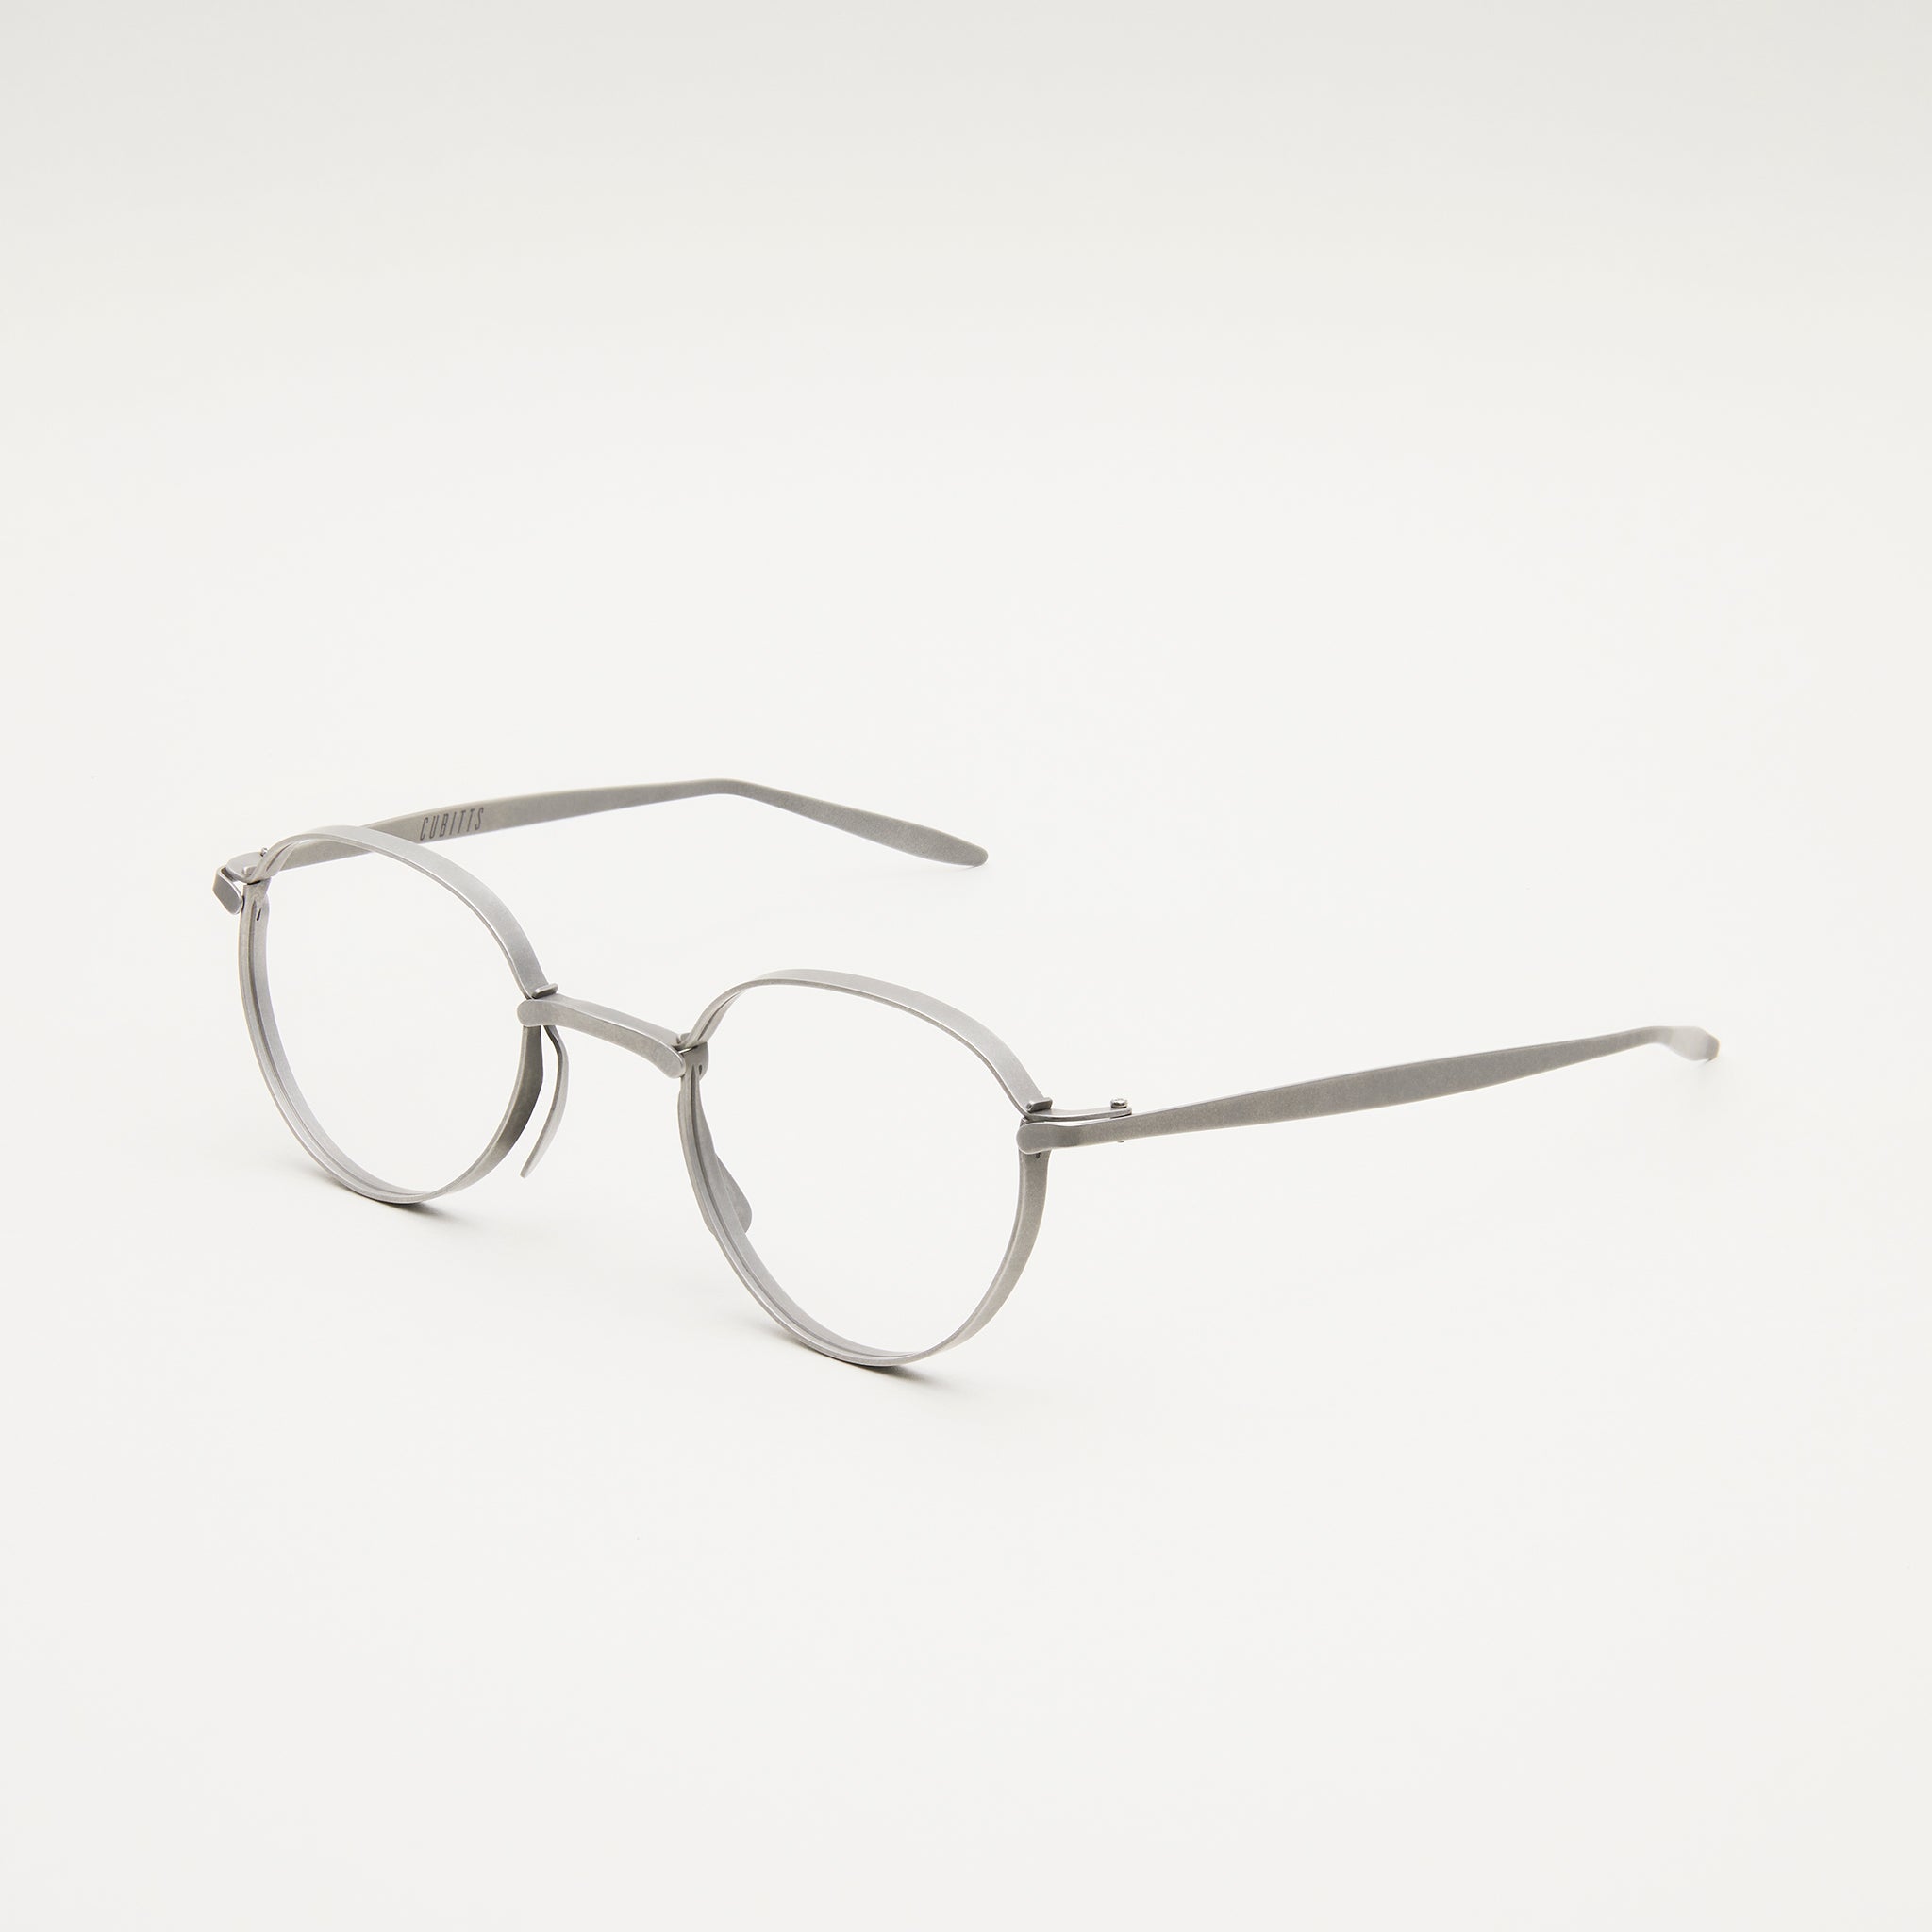 Noguchi: Panto shaped stainless steel glasses | Cubitts